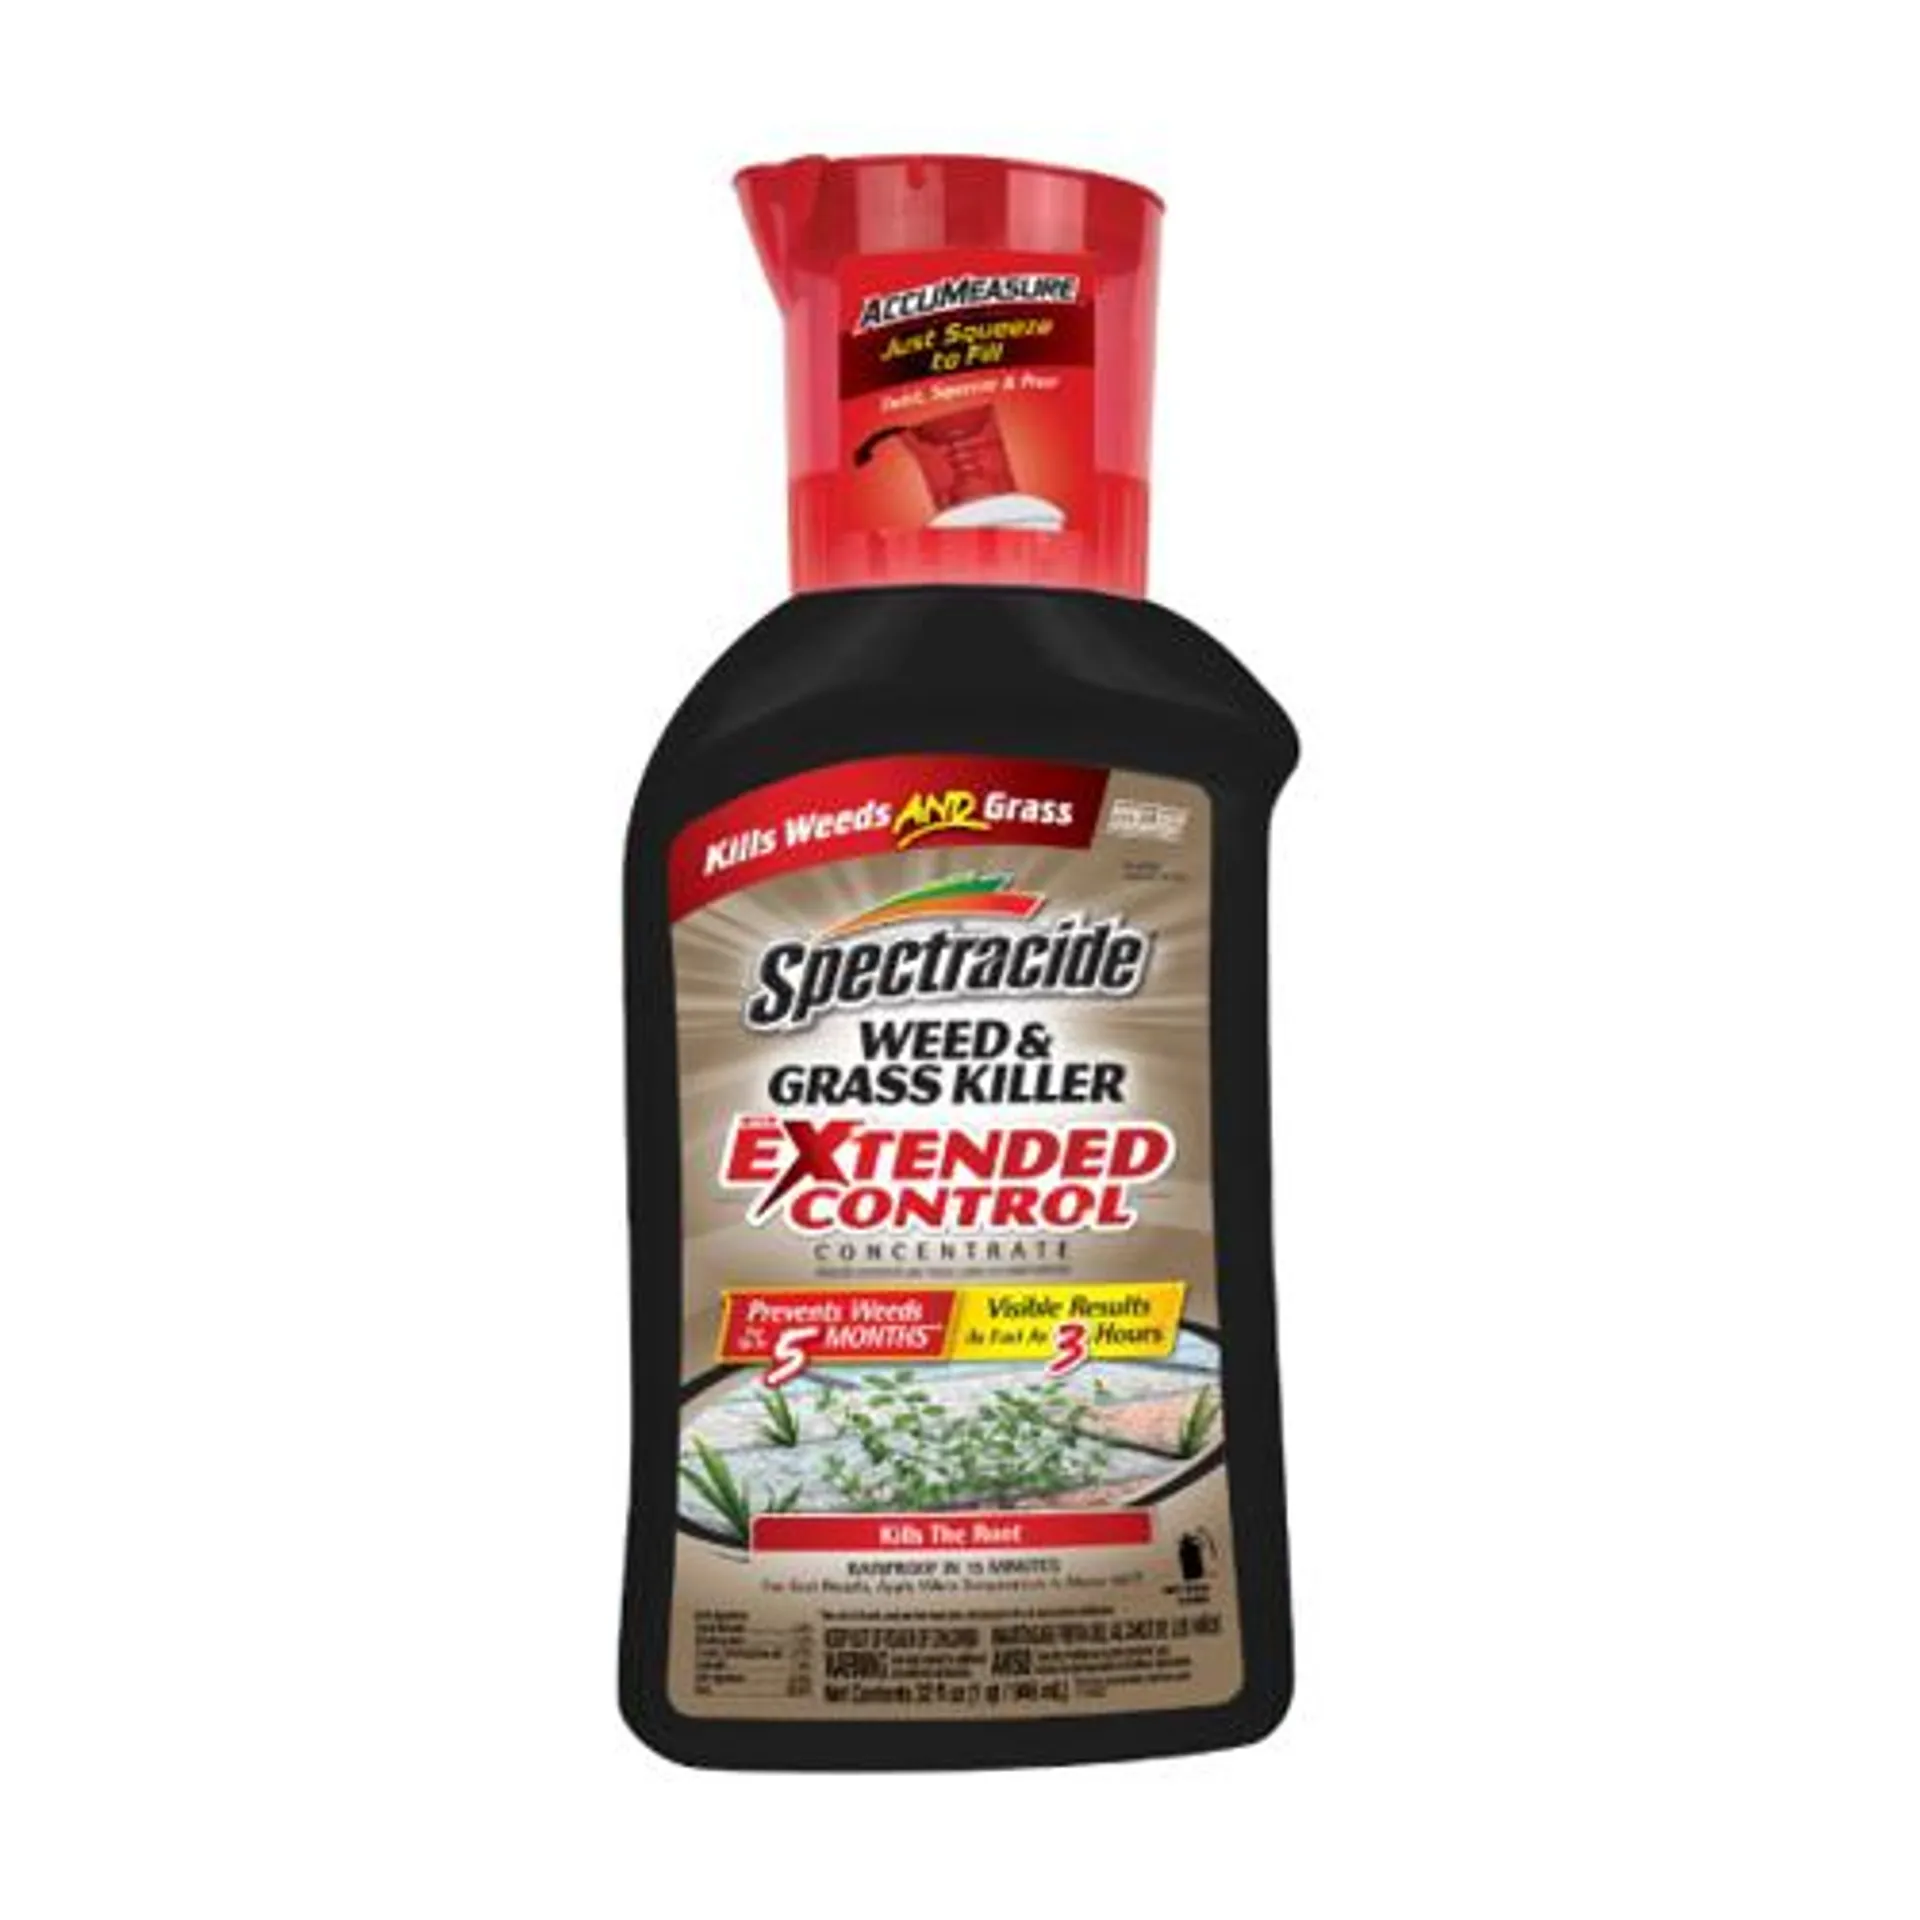 Spectracide Weed & Grass Killer with Extended Control